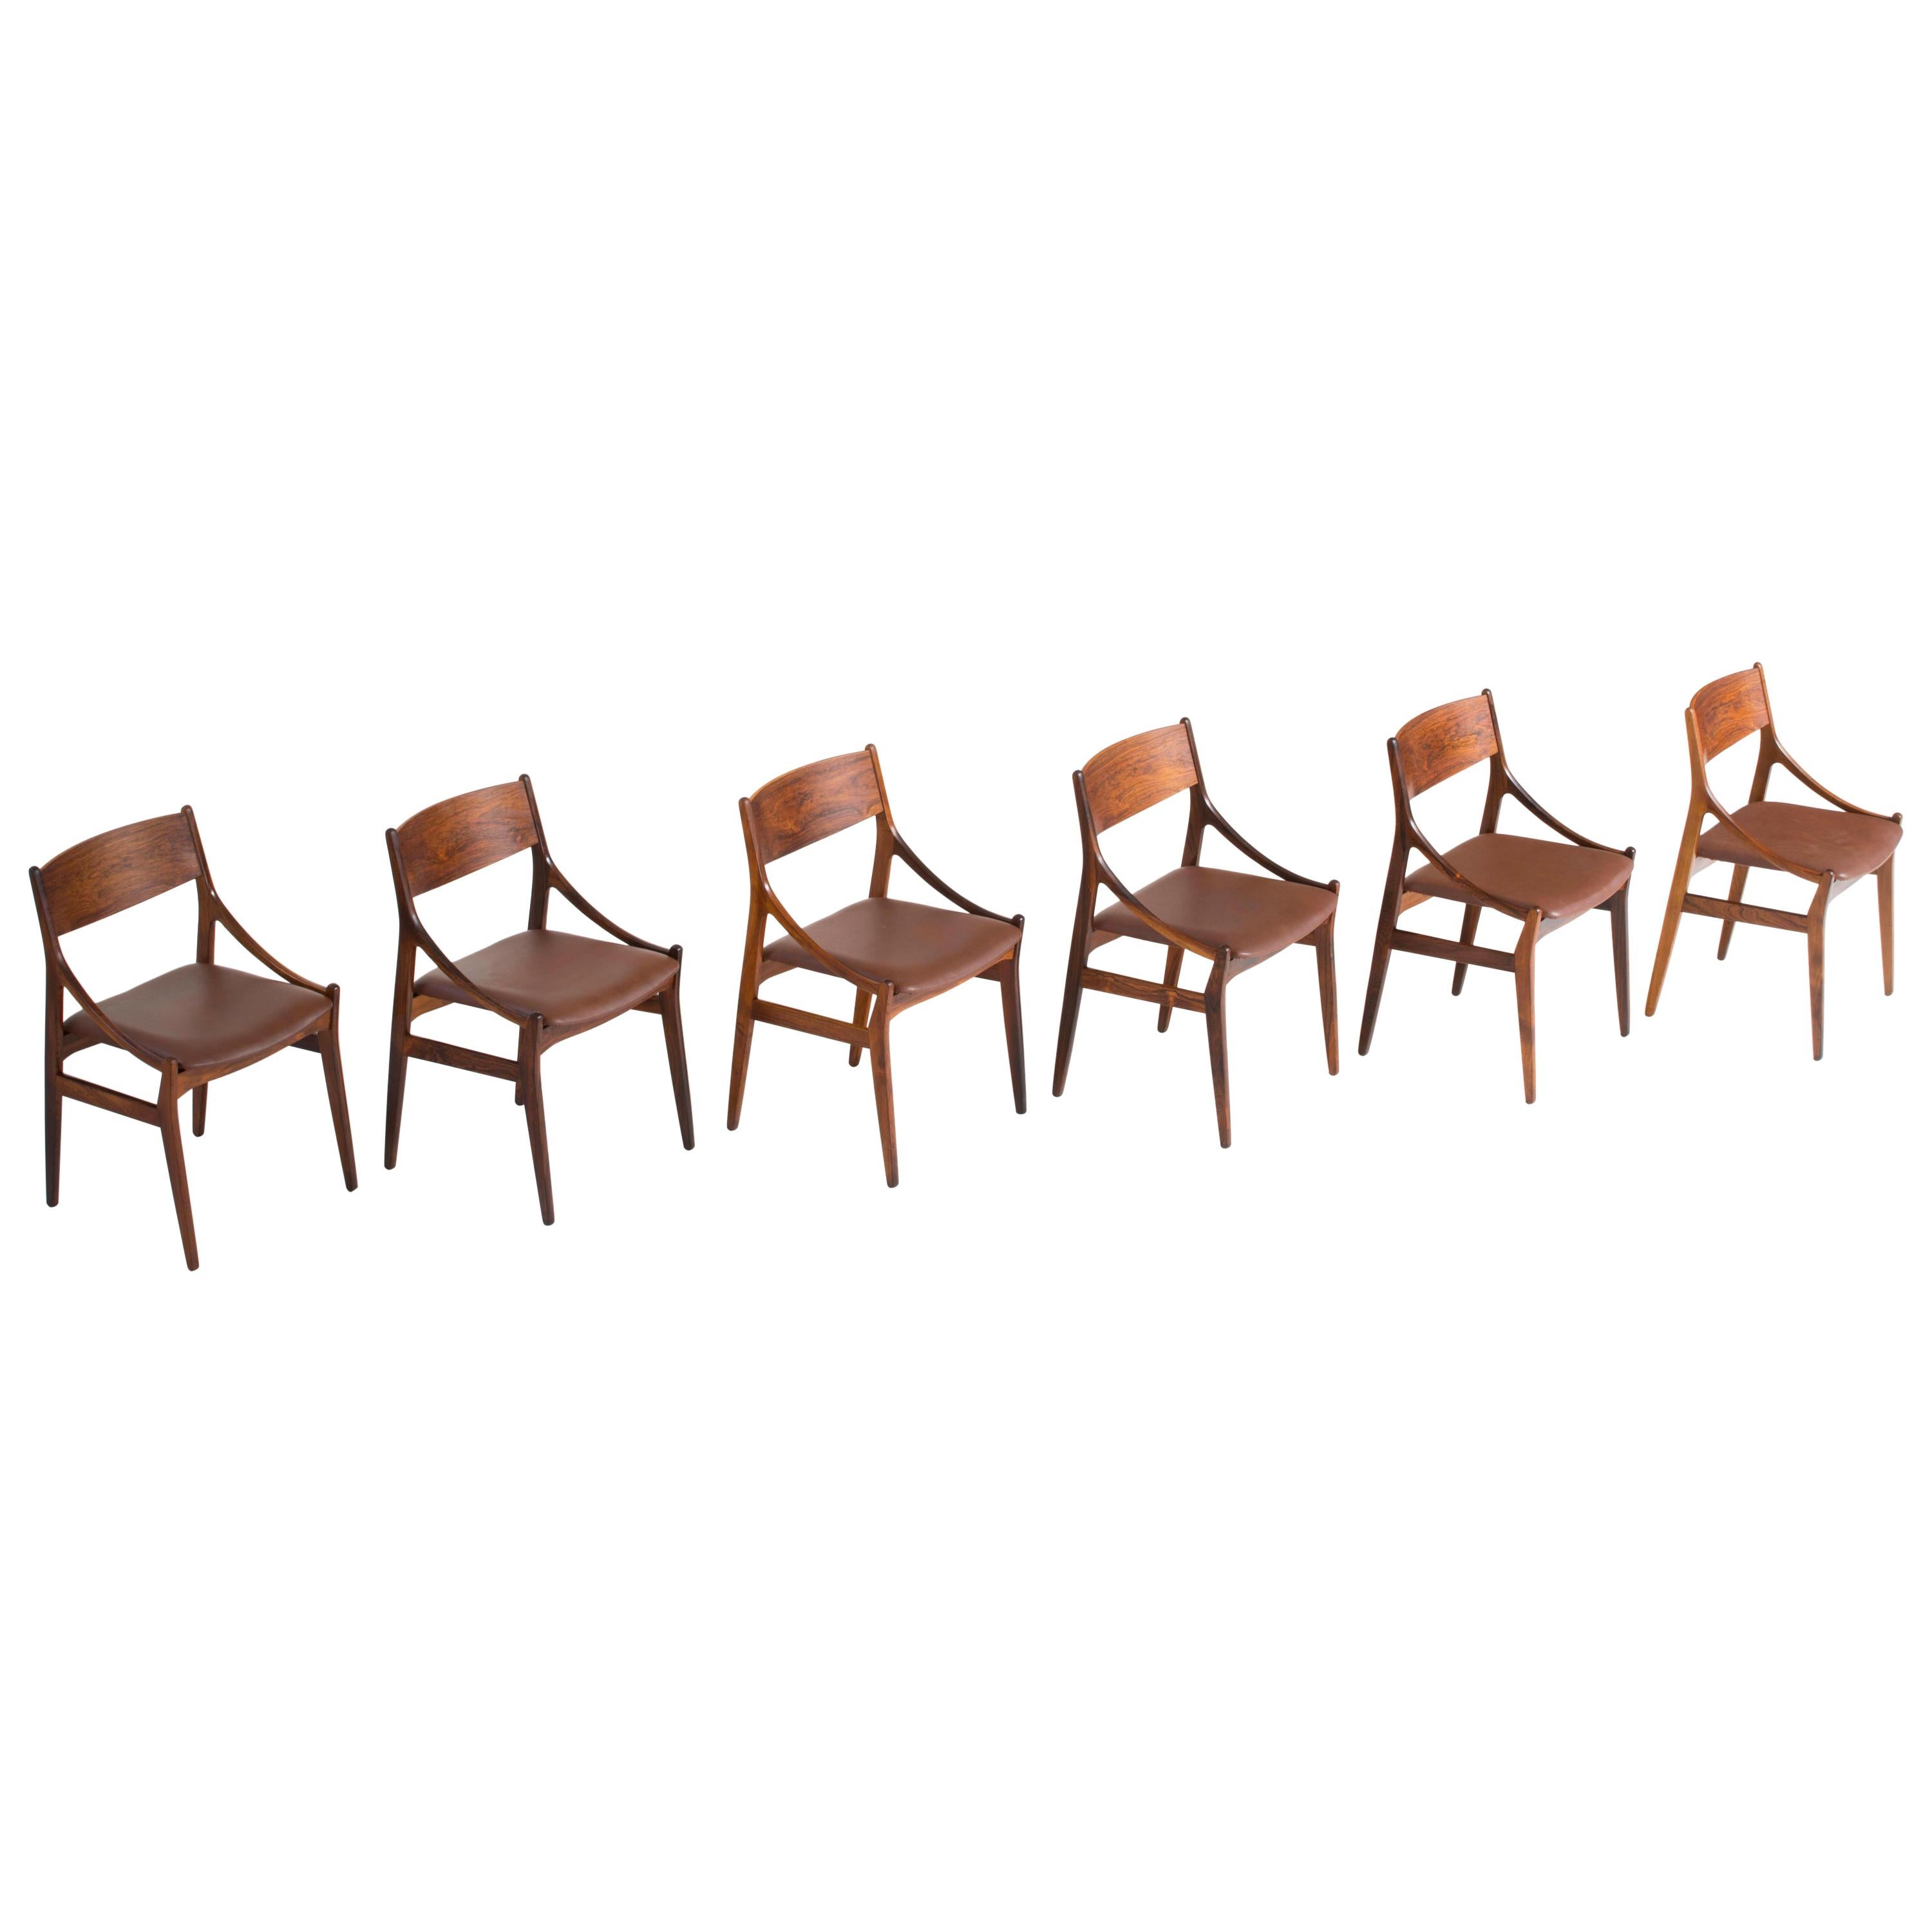 H. Vestervig Eriksen, Set of Six Rosewood Dining Chairs